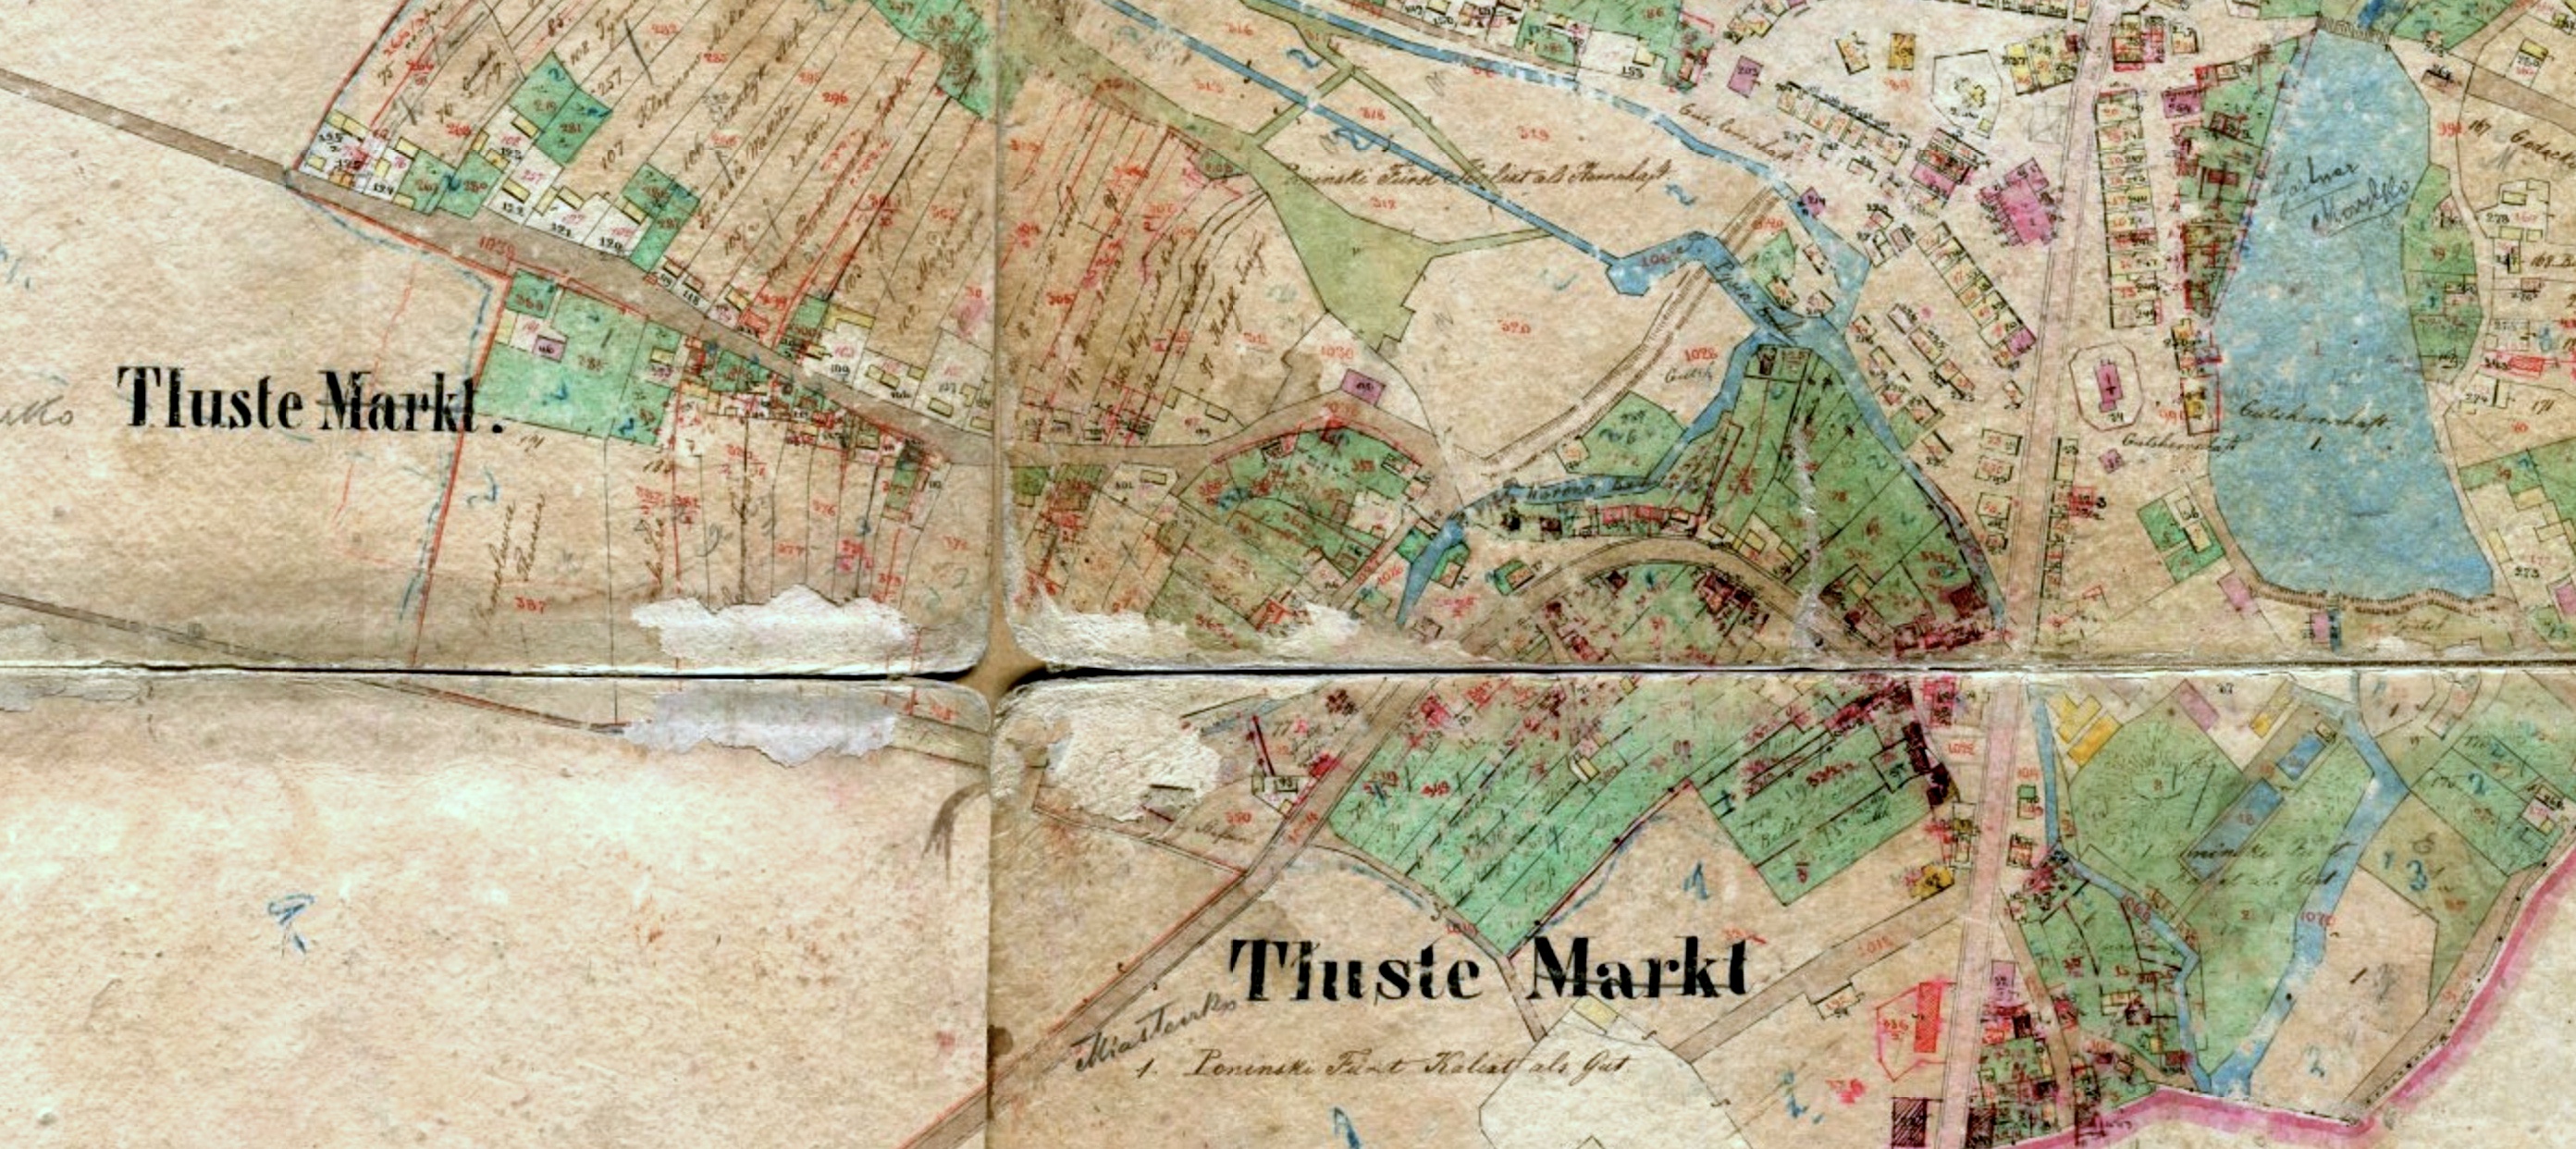 the 1858 cadastral map of Tłuste